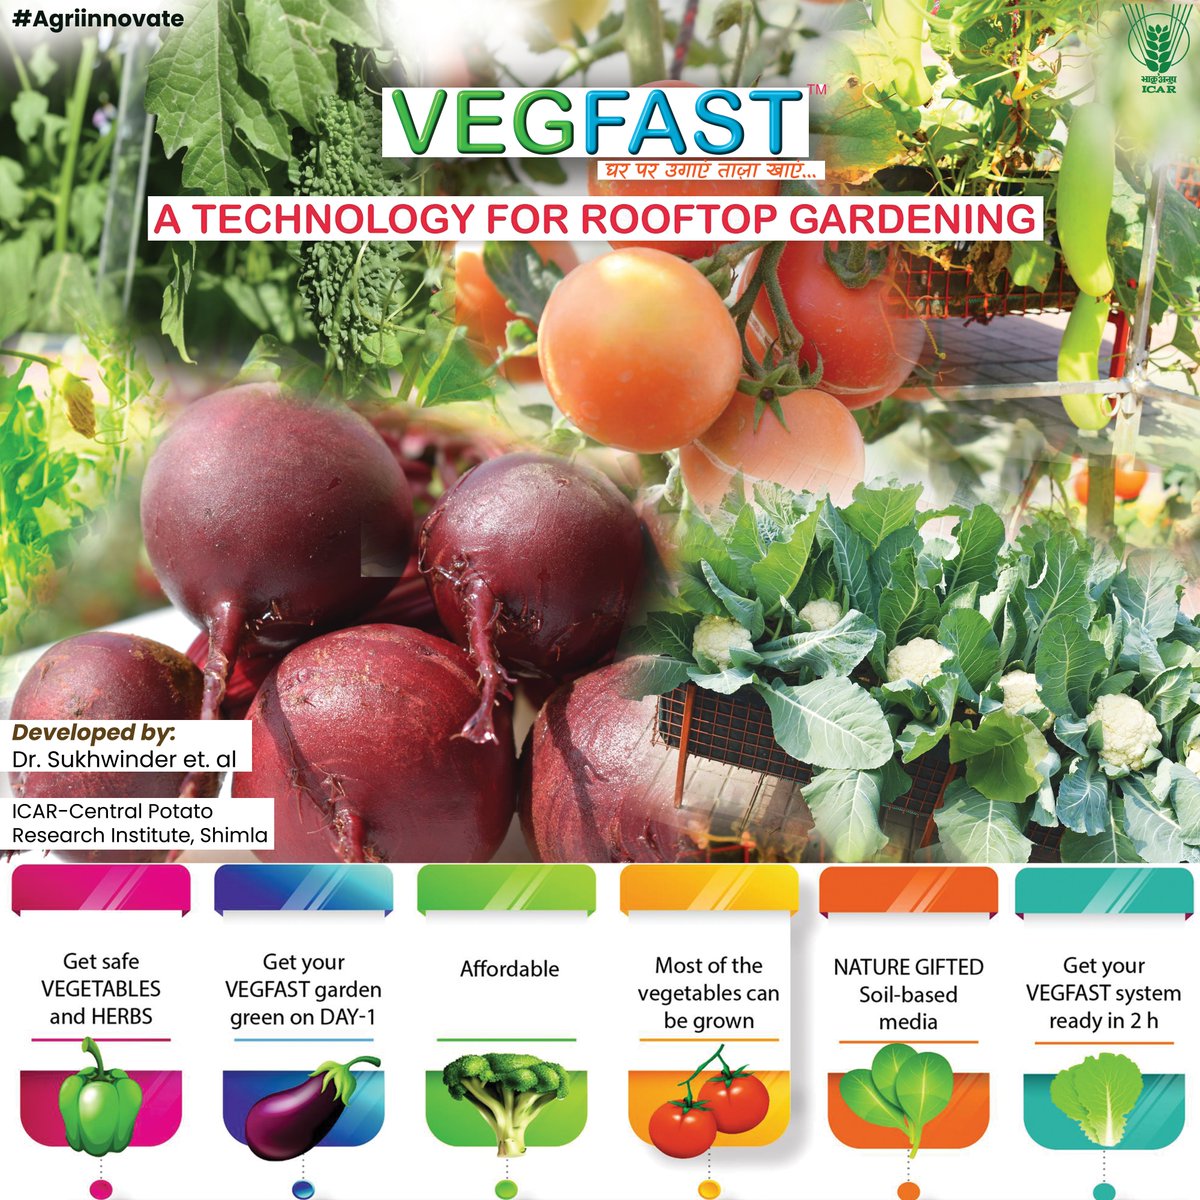 #Veg Fast: A #Technology for #Rooftop #Gardening . #ICAR #agriinnovate @PMOIndia @mygovindia @PIB_India @AgriGoI @DDKisanChannel @Dept_of_AHD